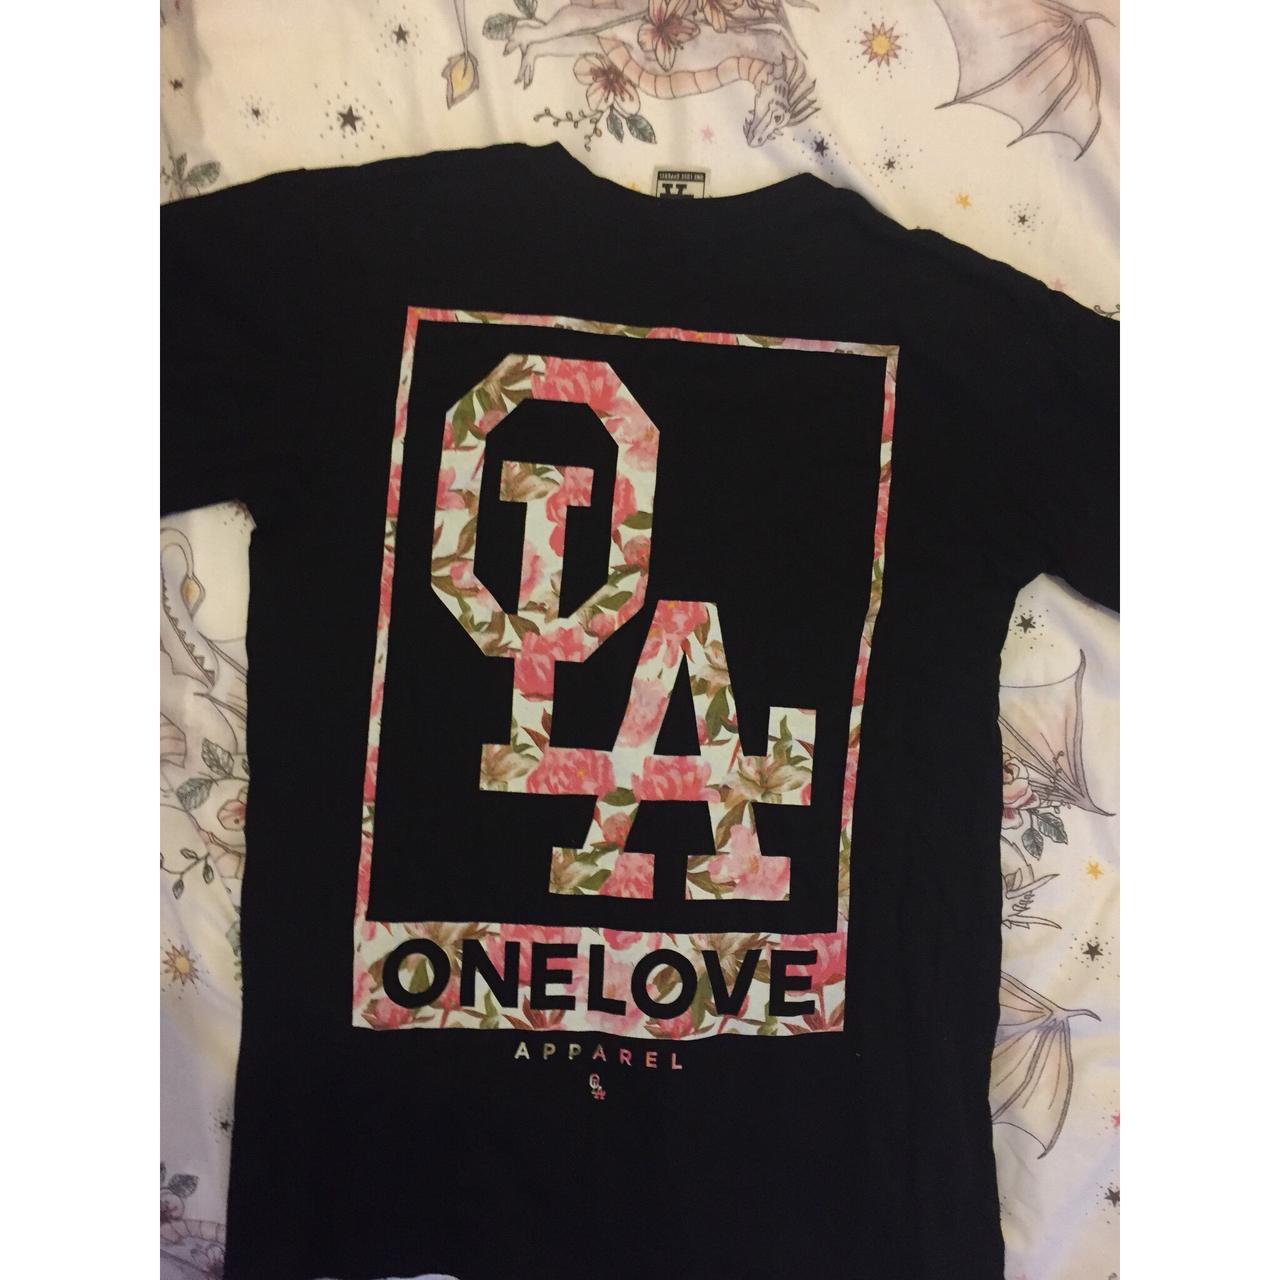 the nicest black one love apparel tshirt ever. has - Depop